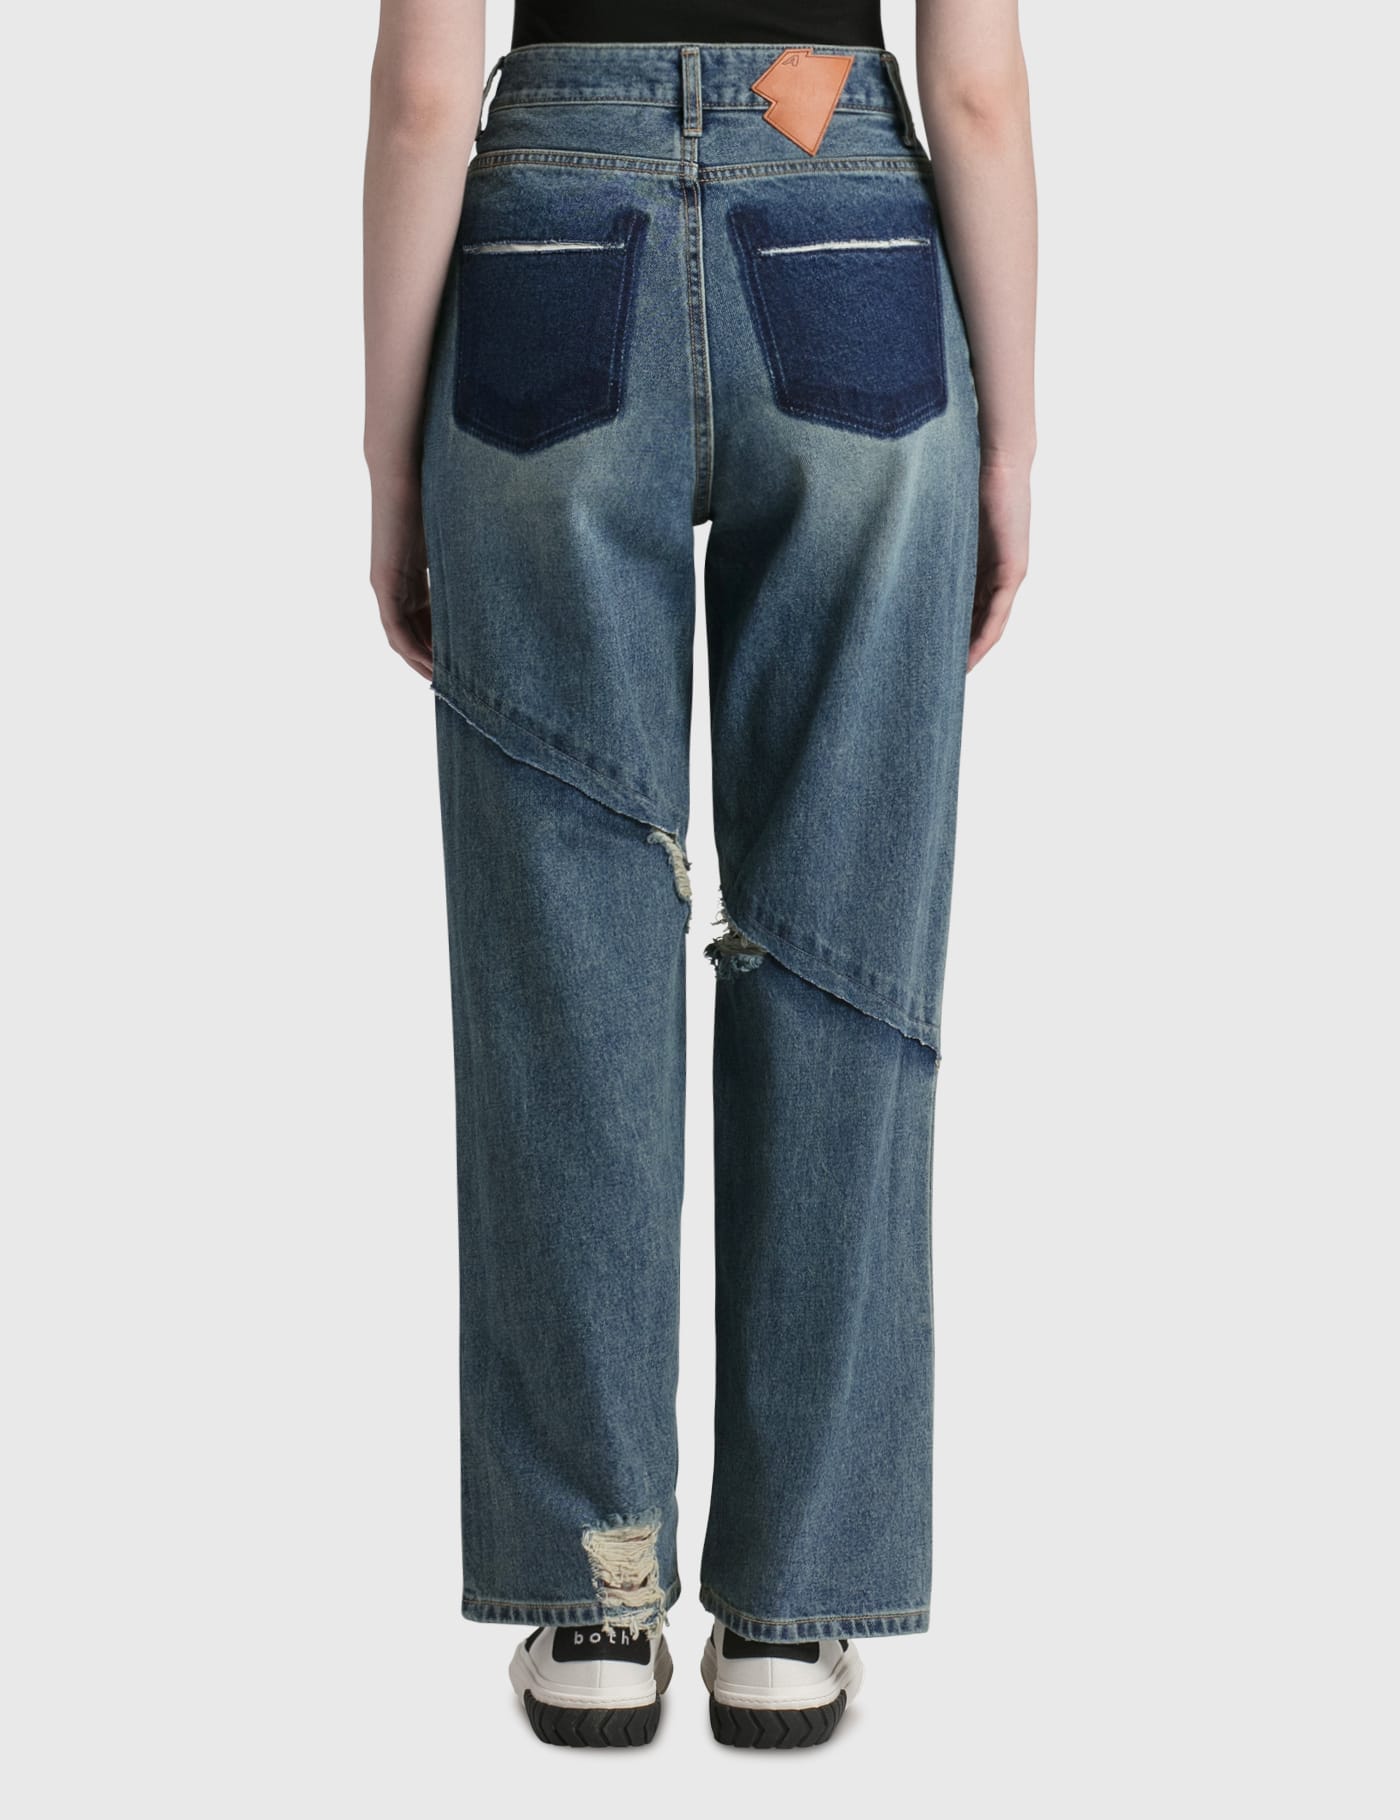 Ader Error - Stami Jeans | HBX - Globally Curated Fashion and Lifestyle by  Hypebeast